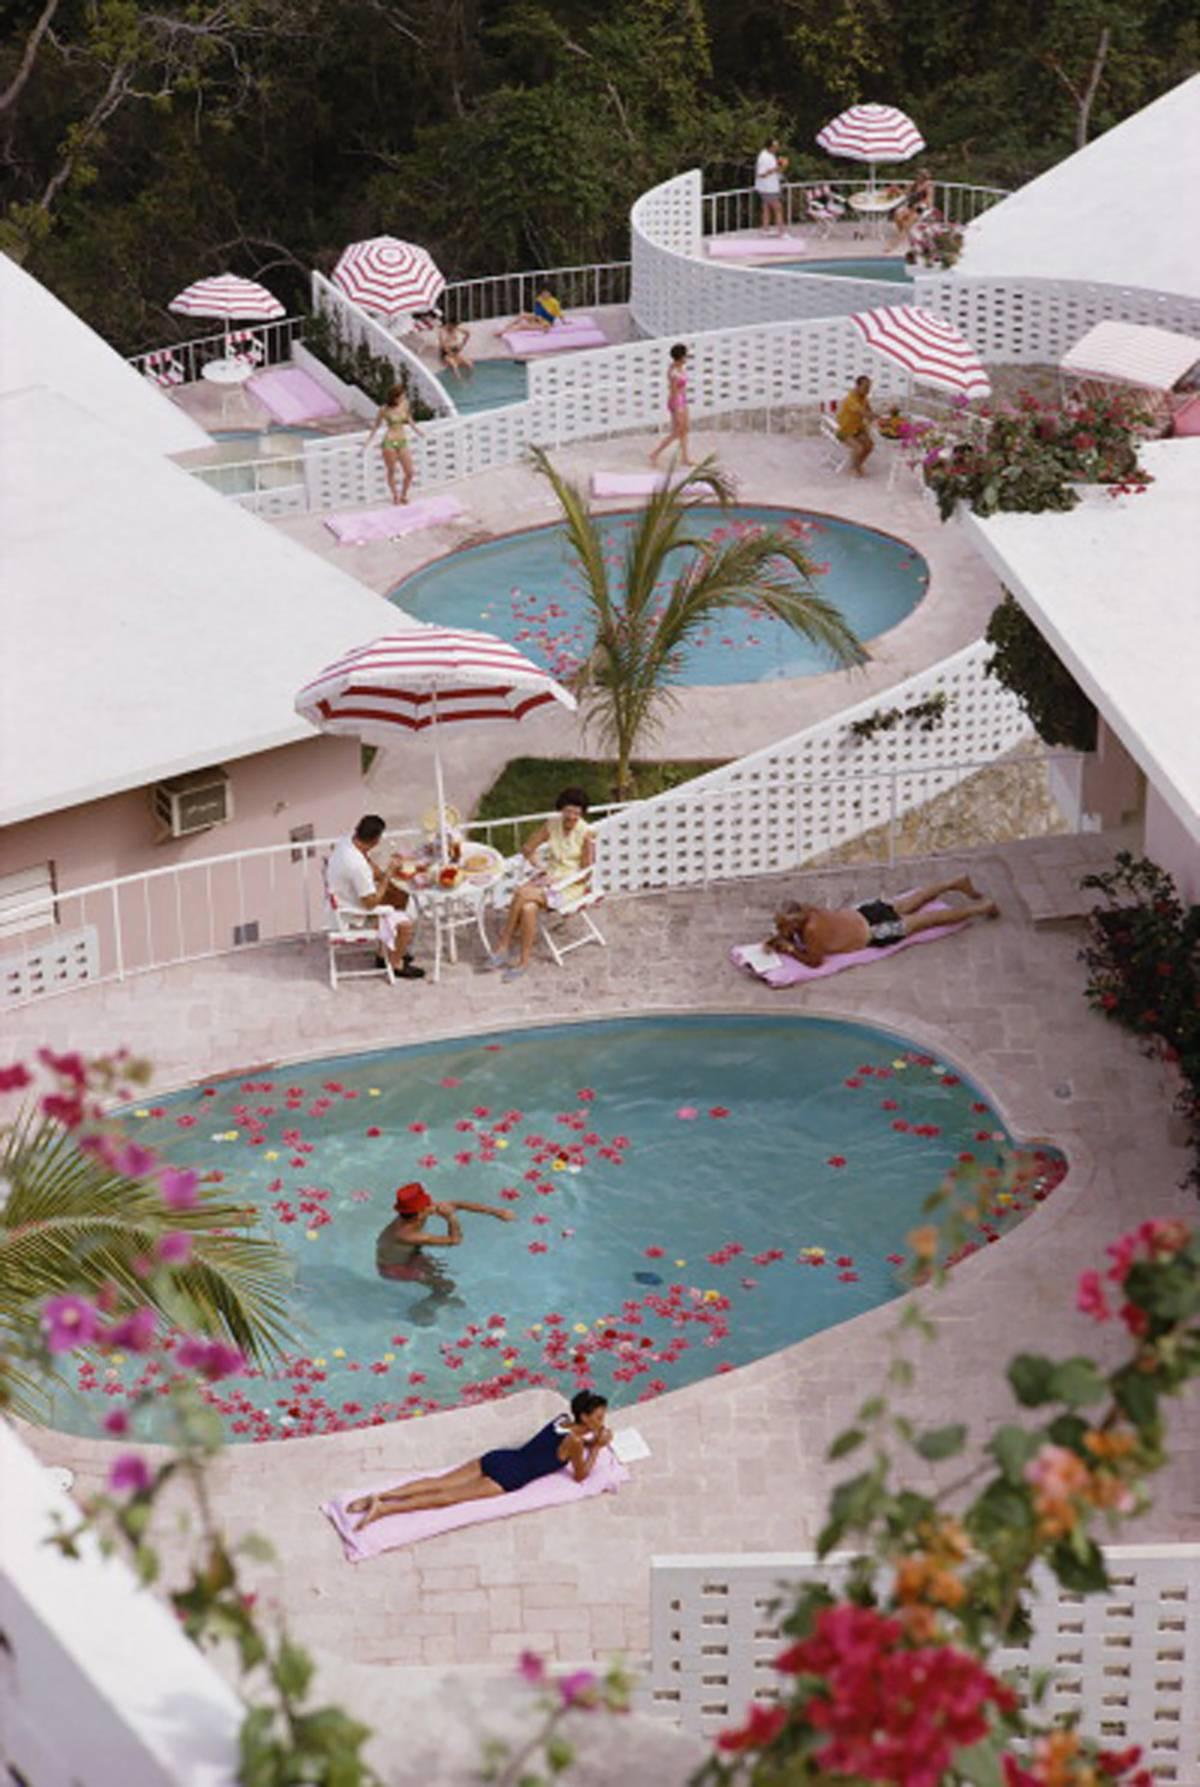 Slim Aarons
Hotel Las Brisas
1968 (printed later)
c-print
Estate stamped and hand numbered edition of 150 with certificate of authenticity from the estate. 

Apartments and pools at the La Concha Beach Club in Las Brisas resort in Acapulco, Mexico,